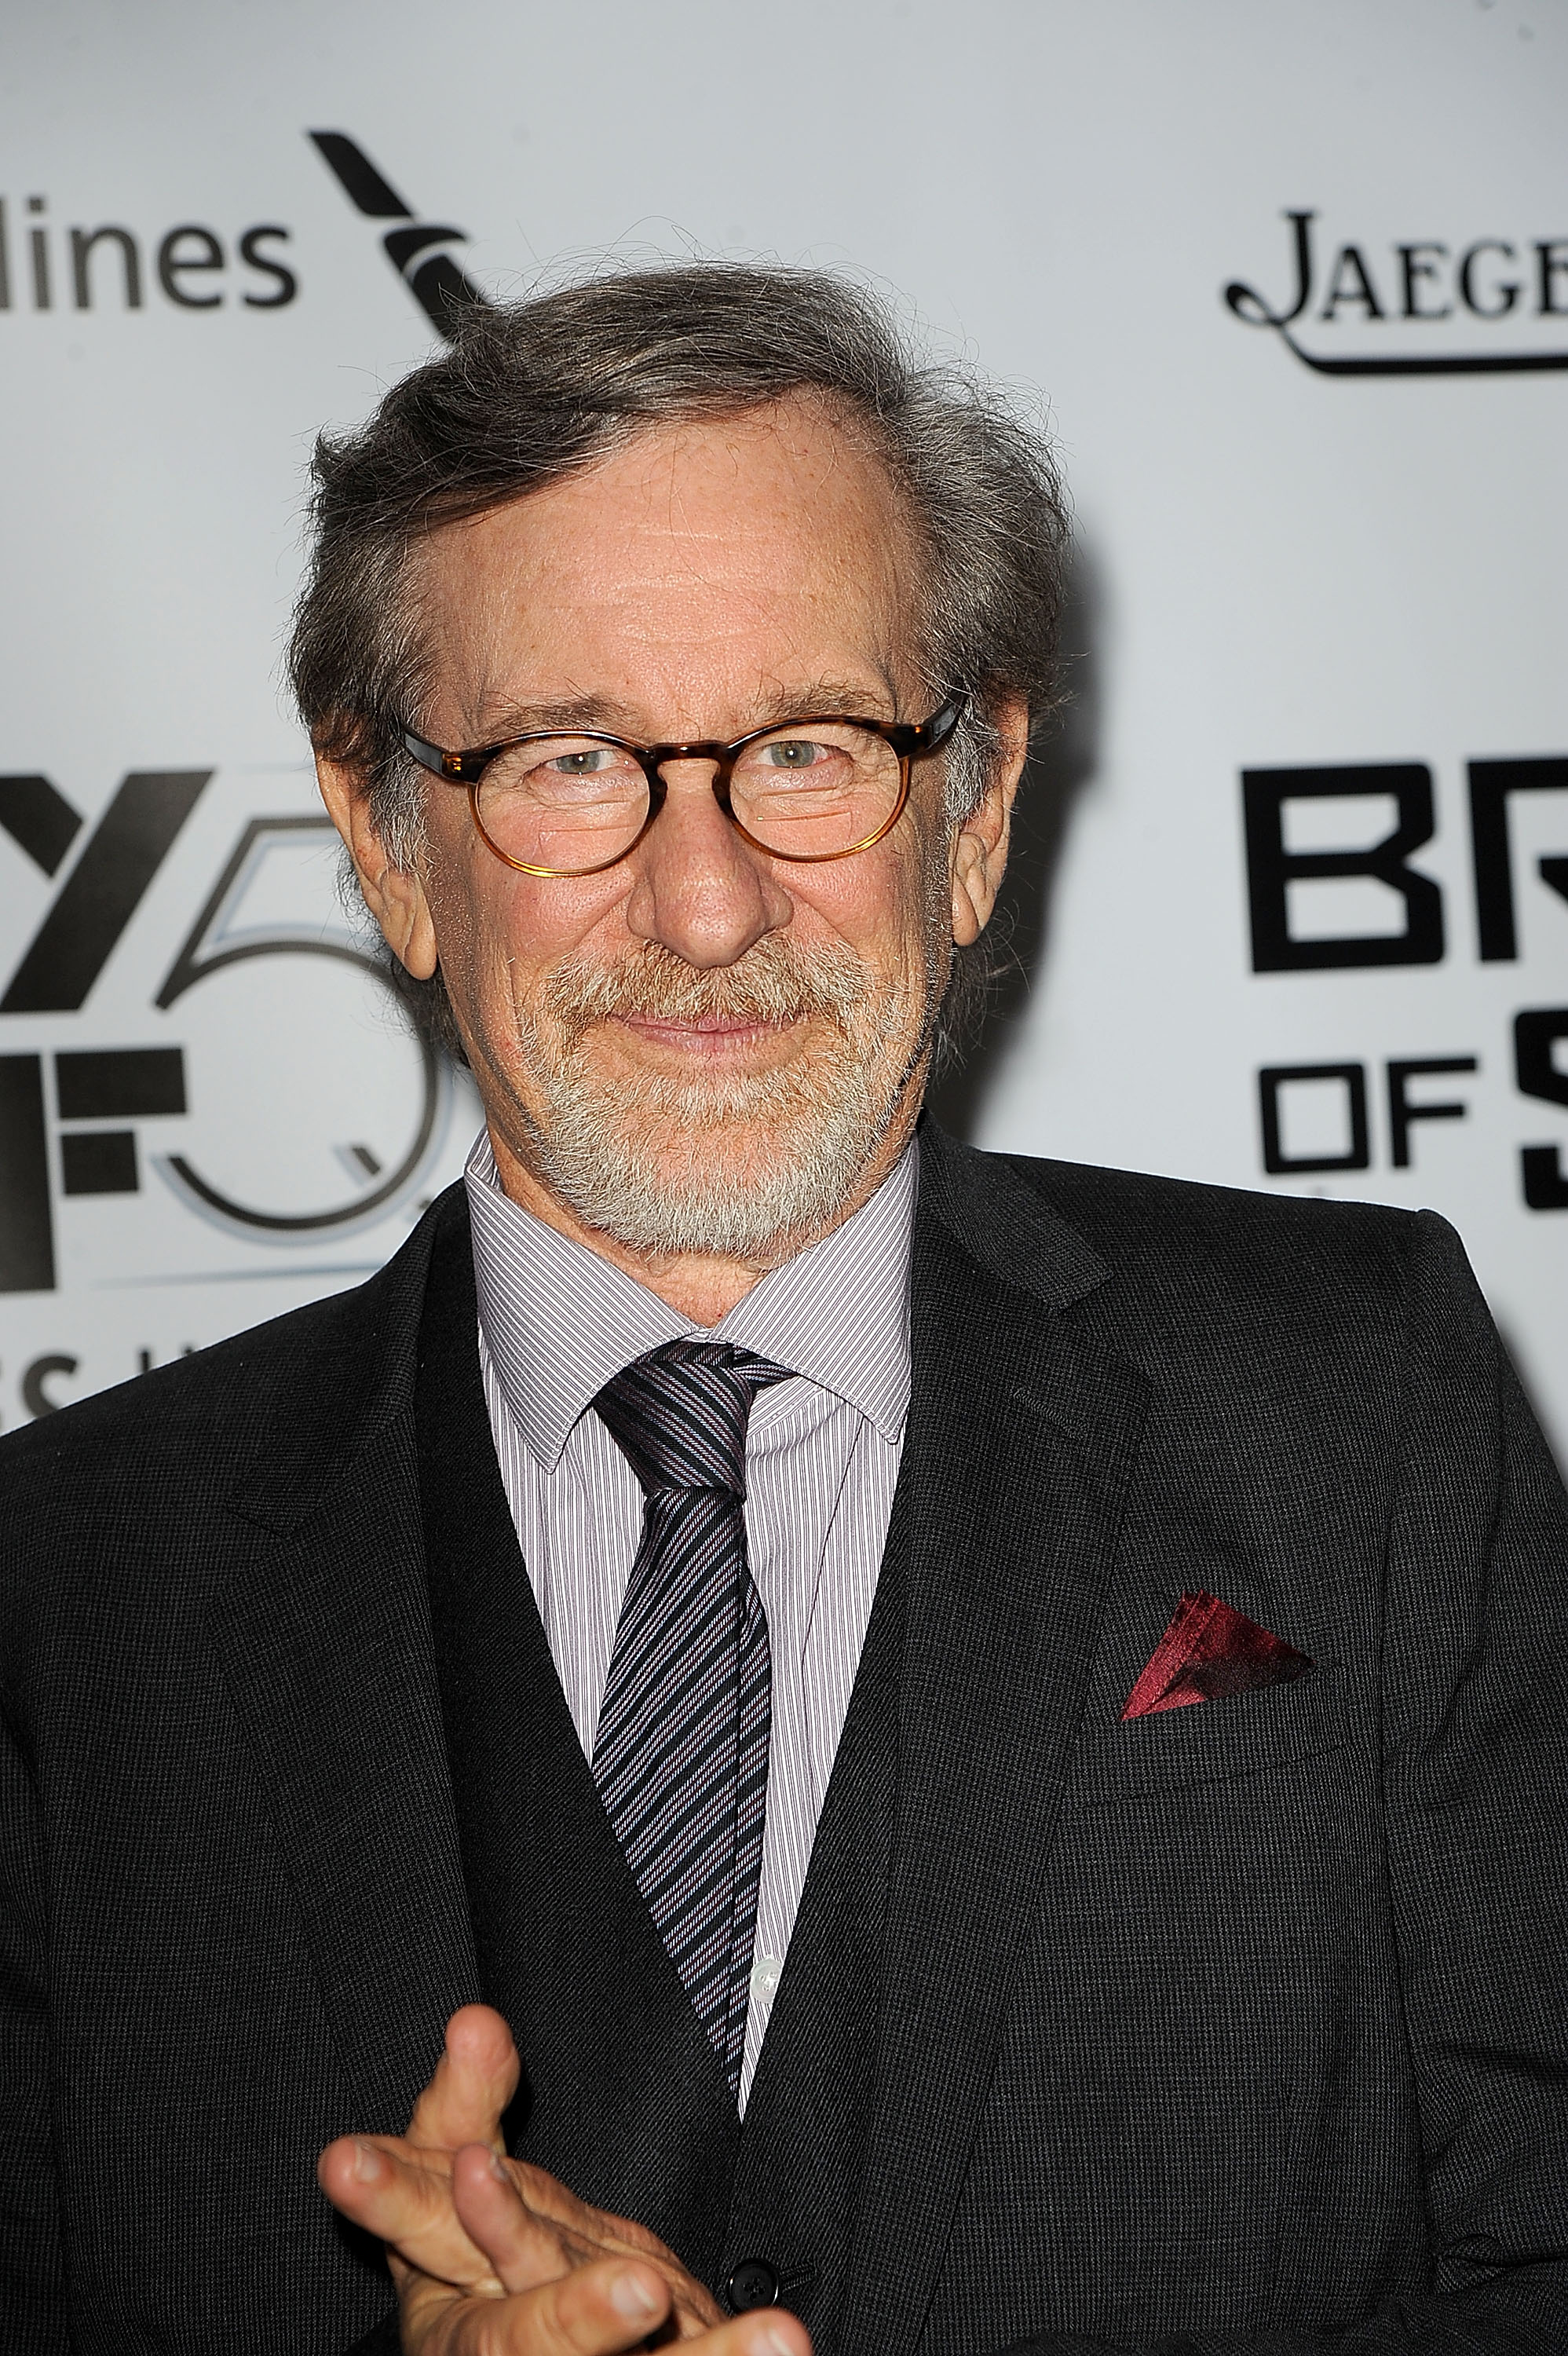 Steven Spielberg at the 53rd New York Film Festival premiere of 'Bridge Of Spies' on Oct. 4, 2015.